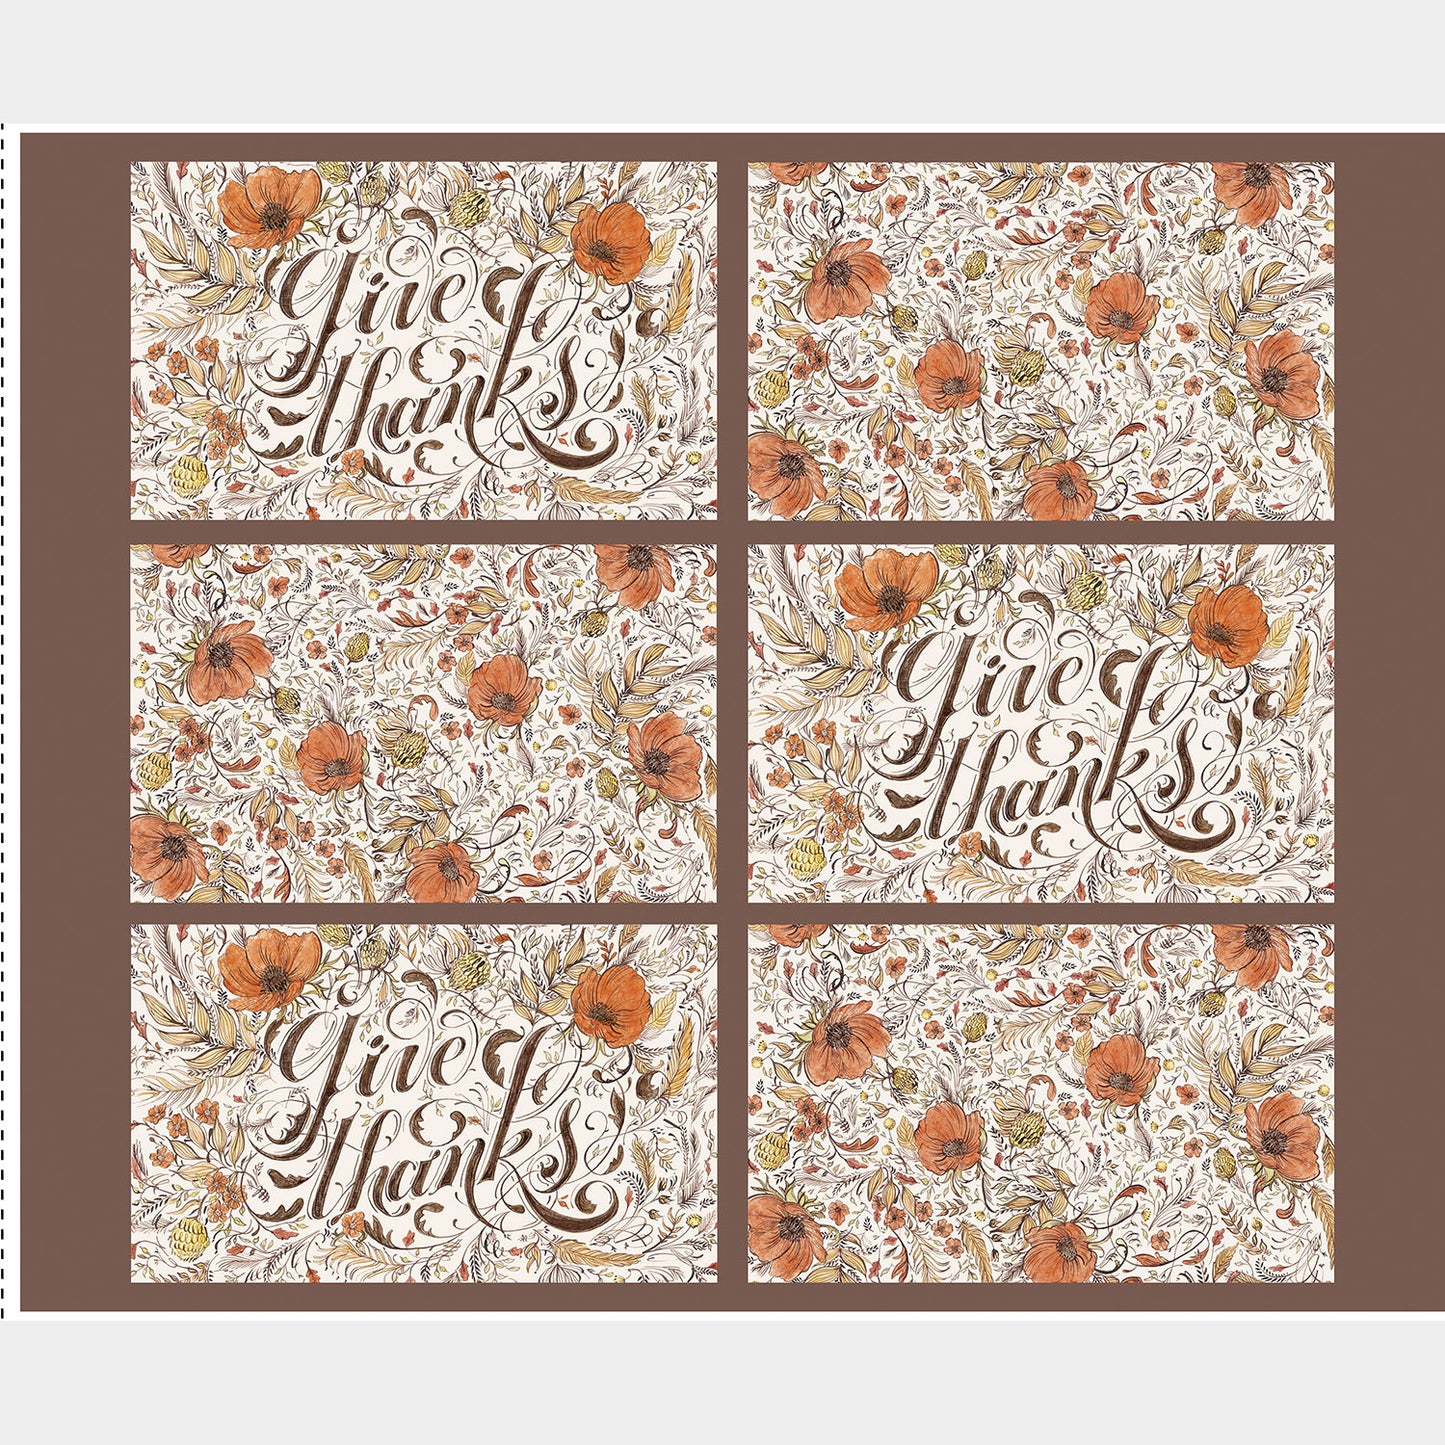 Monthly Placemat Panels - November Give Thanks Placemat Multi Panel Primary Image